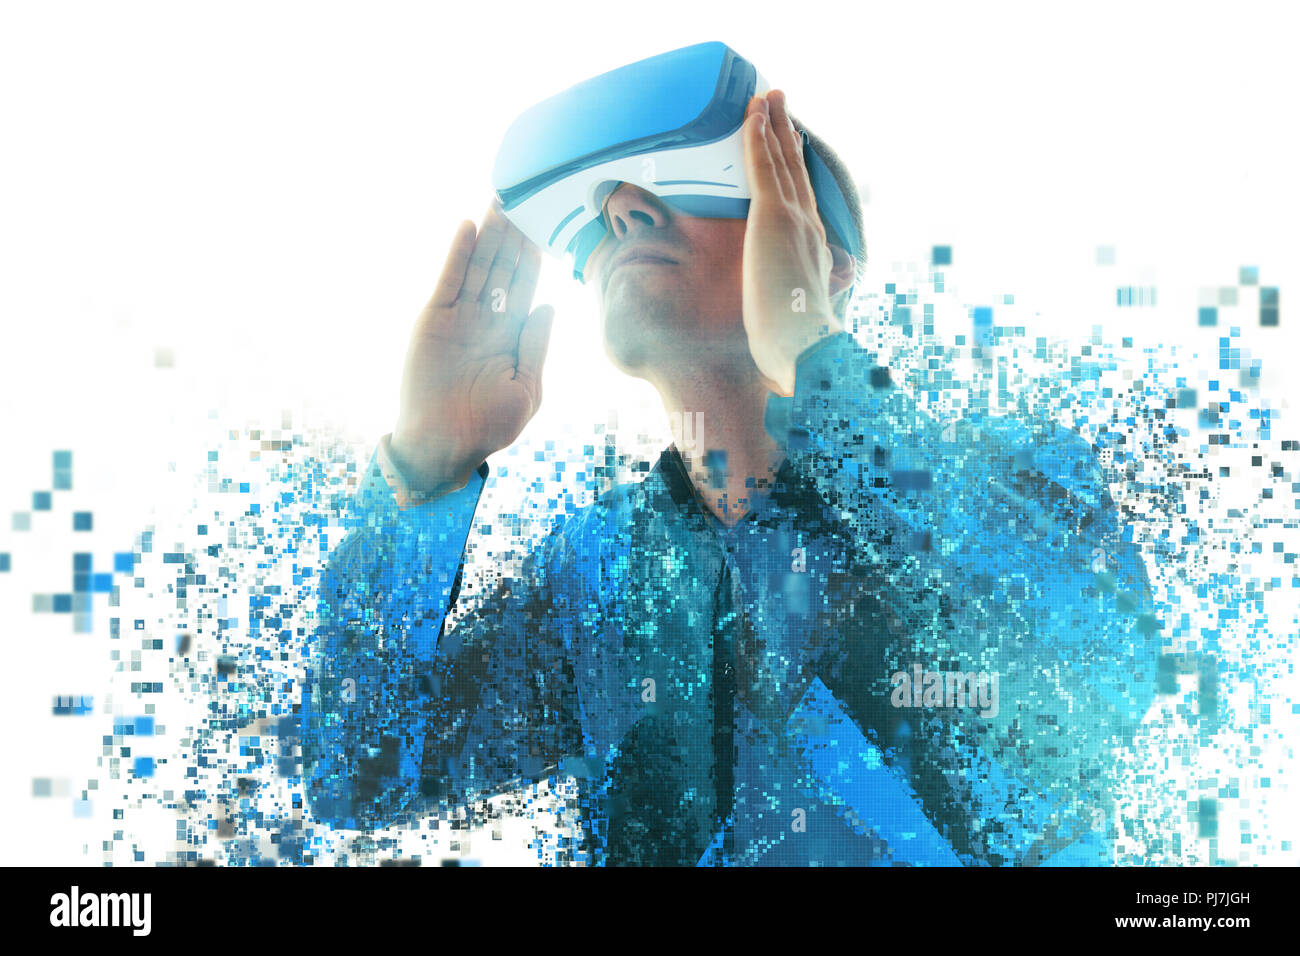 A person in virtual reality glasses flies to pixels. The concept of new technologies and technologies of the future.VR glasses. Stock Photo